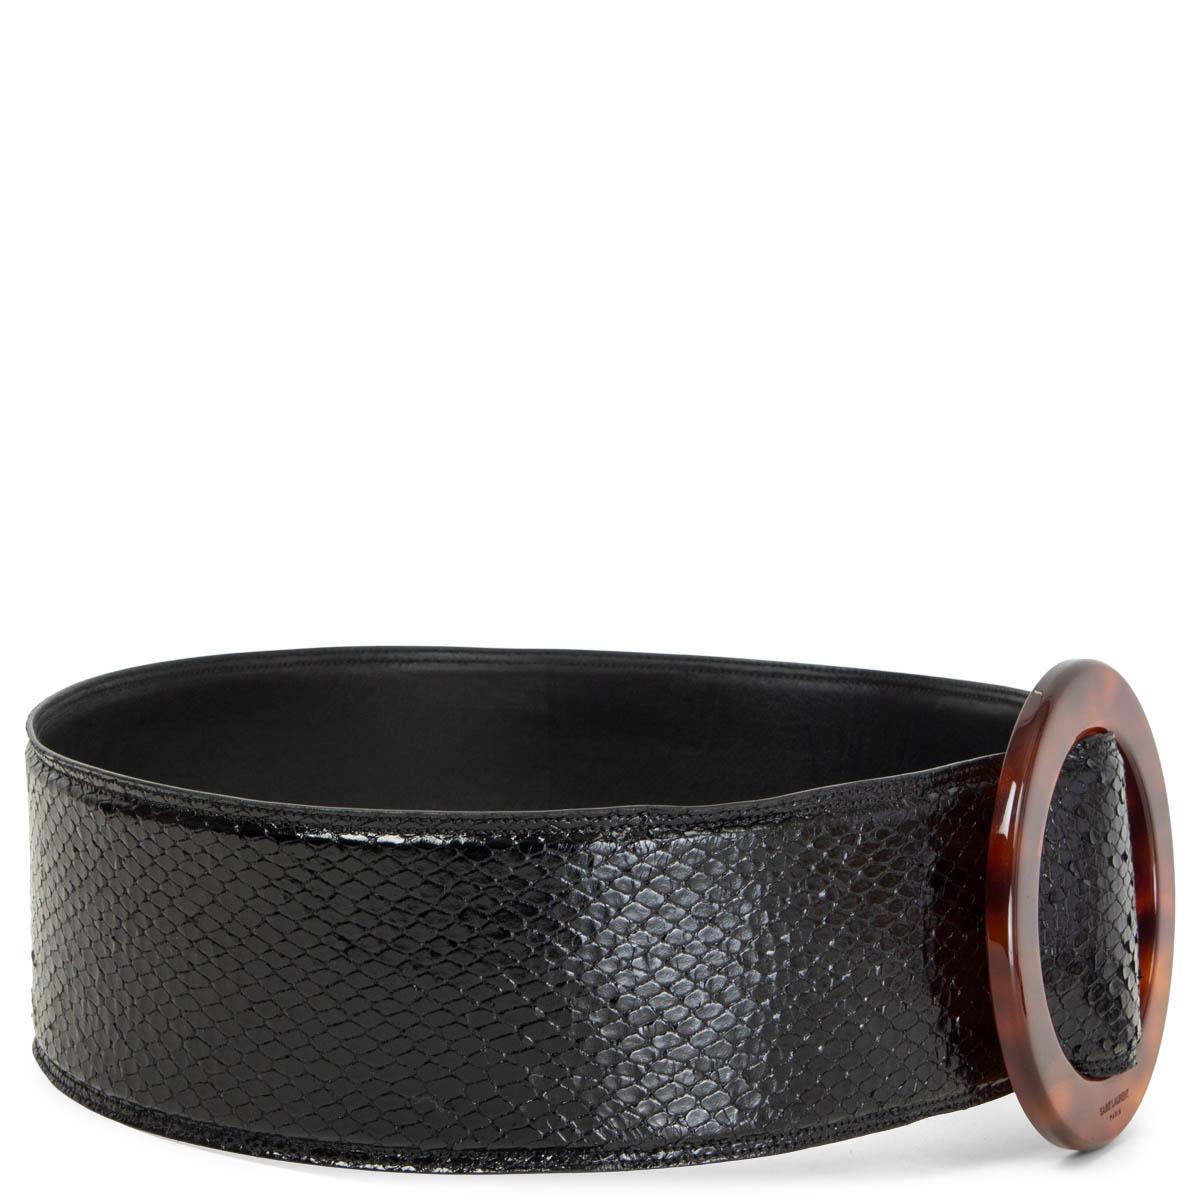 100% authentic Saint Laurent waist belt in black python with a round tortoiseshell acetate buckle. Has been worn with some scratches on the buckle. Overall in very good condition. 

Measurements
Tag Size	85
Width	7.5cm (2.9in)
Length	99cm